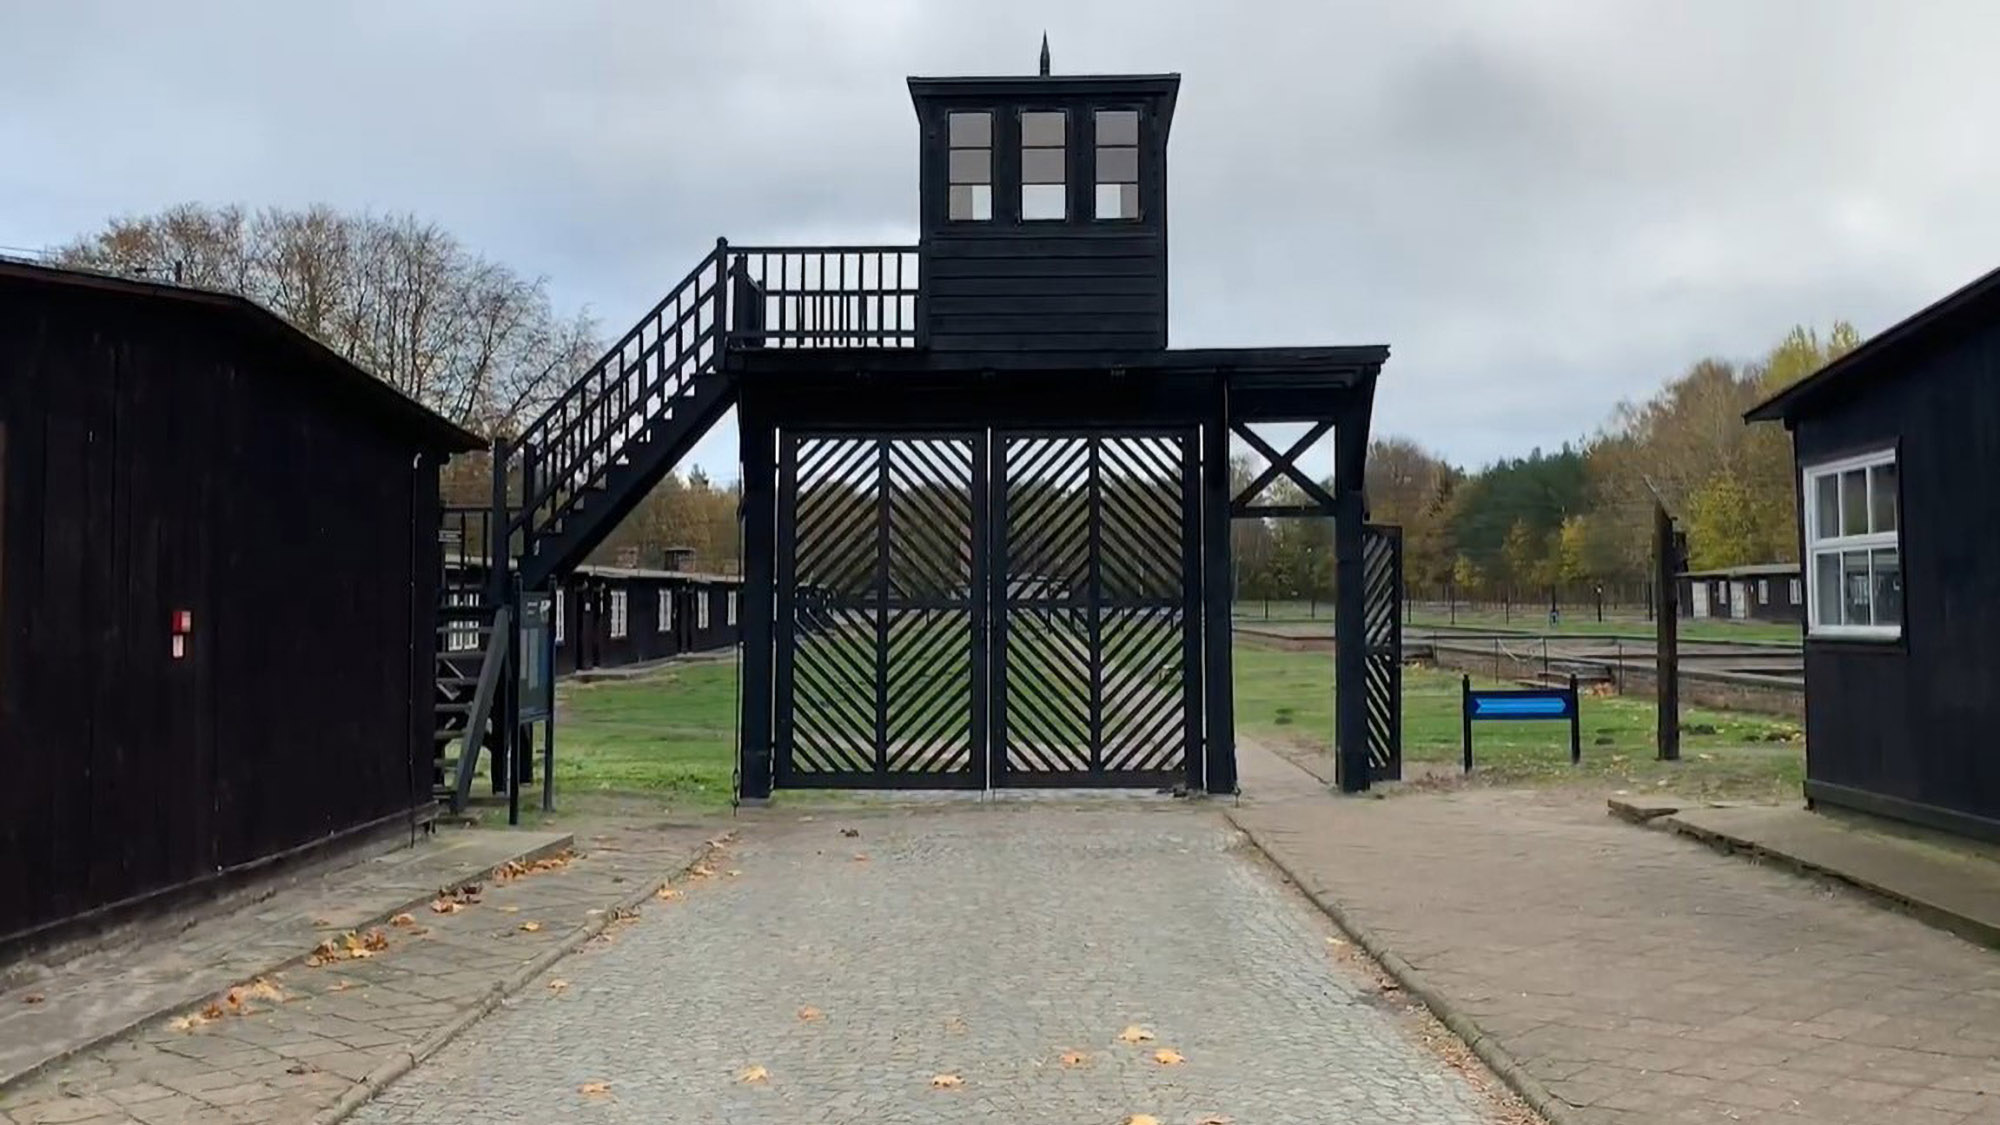 Read more about the article Nazi Concentration Camp Secretary, 96, Faces Trial After Going On Run Before Last Court Date